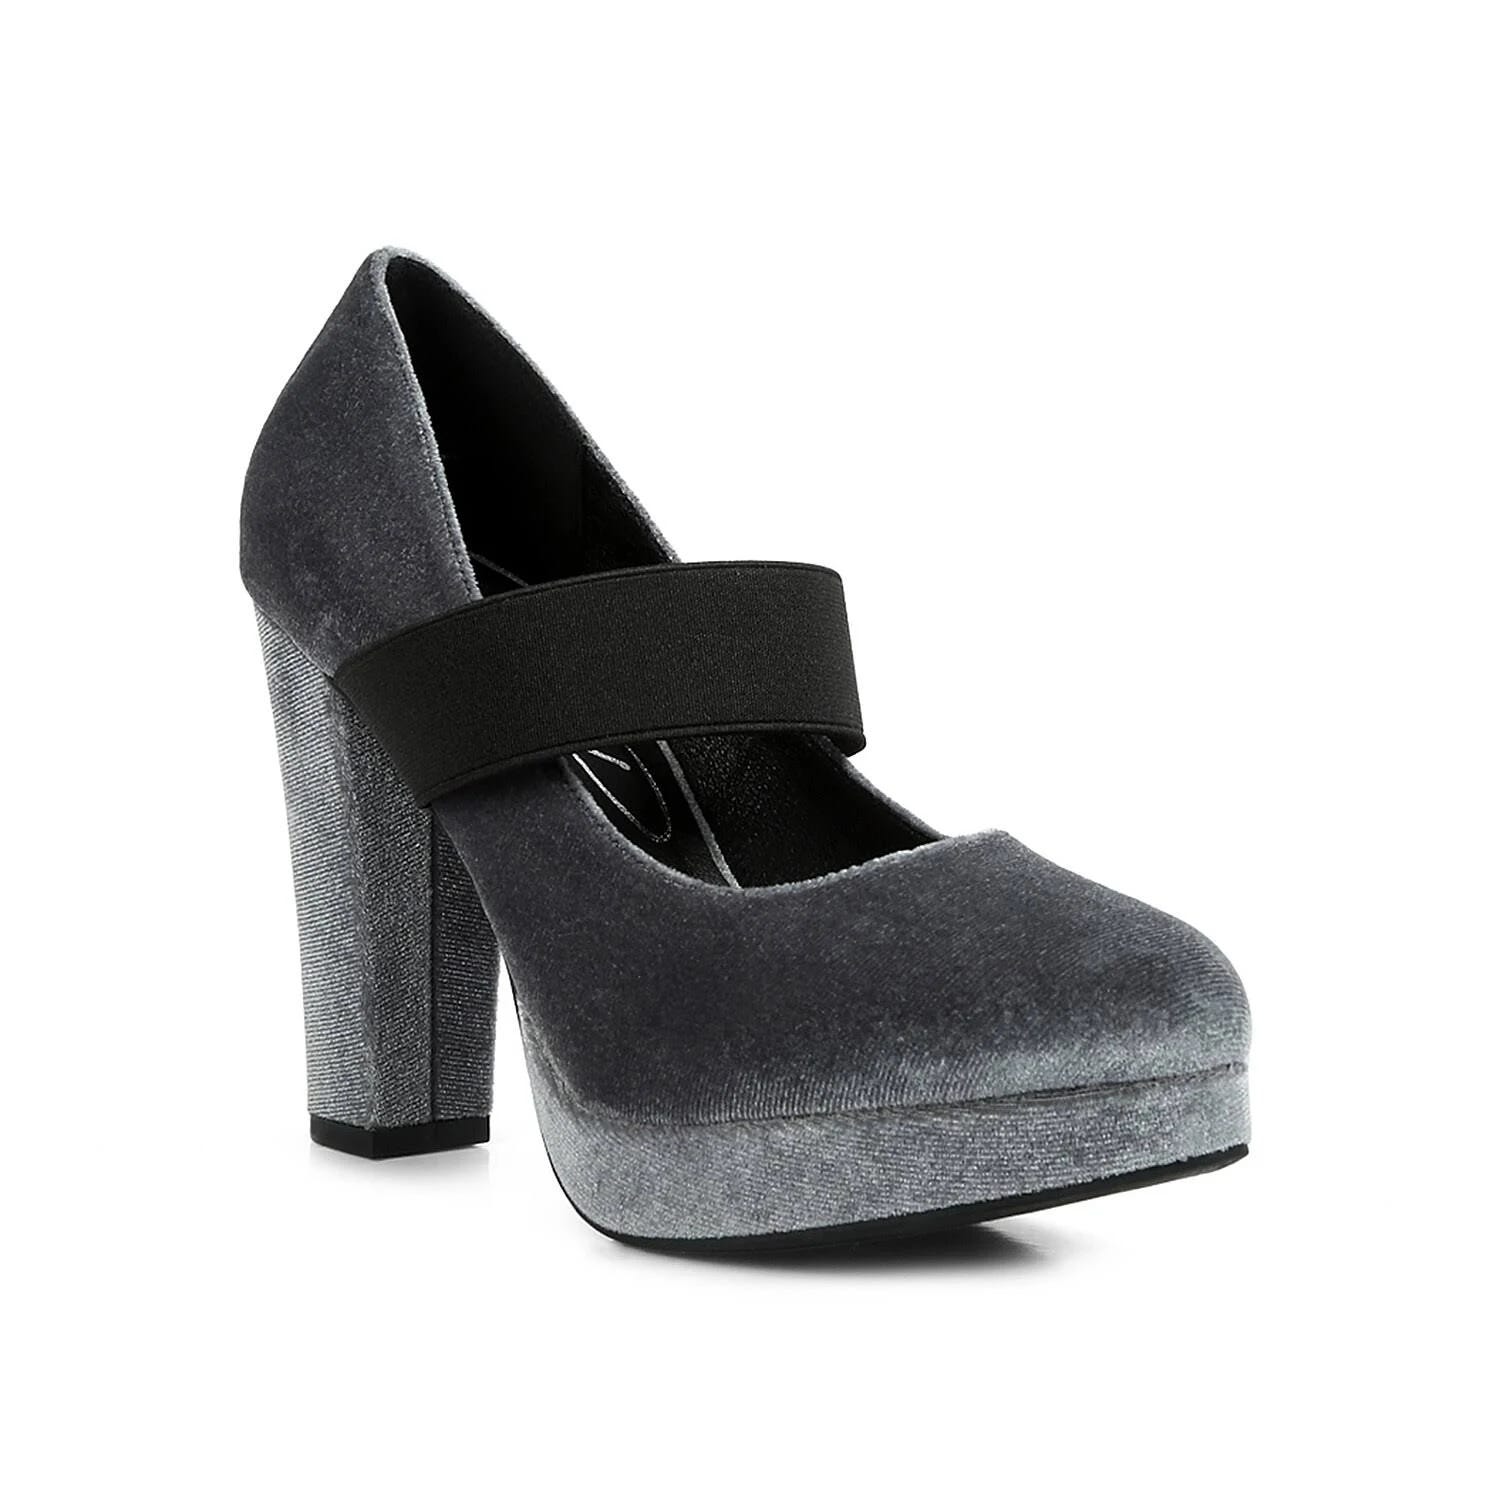 Elevated Velvet Pump with Rubber Sole | Image